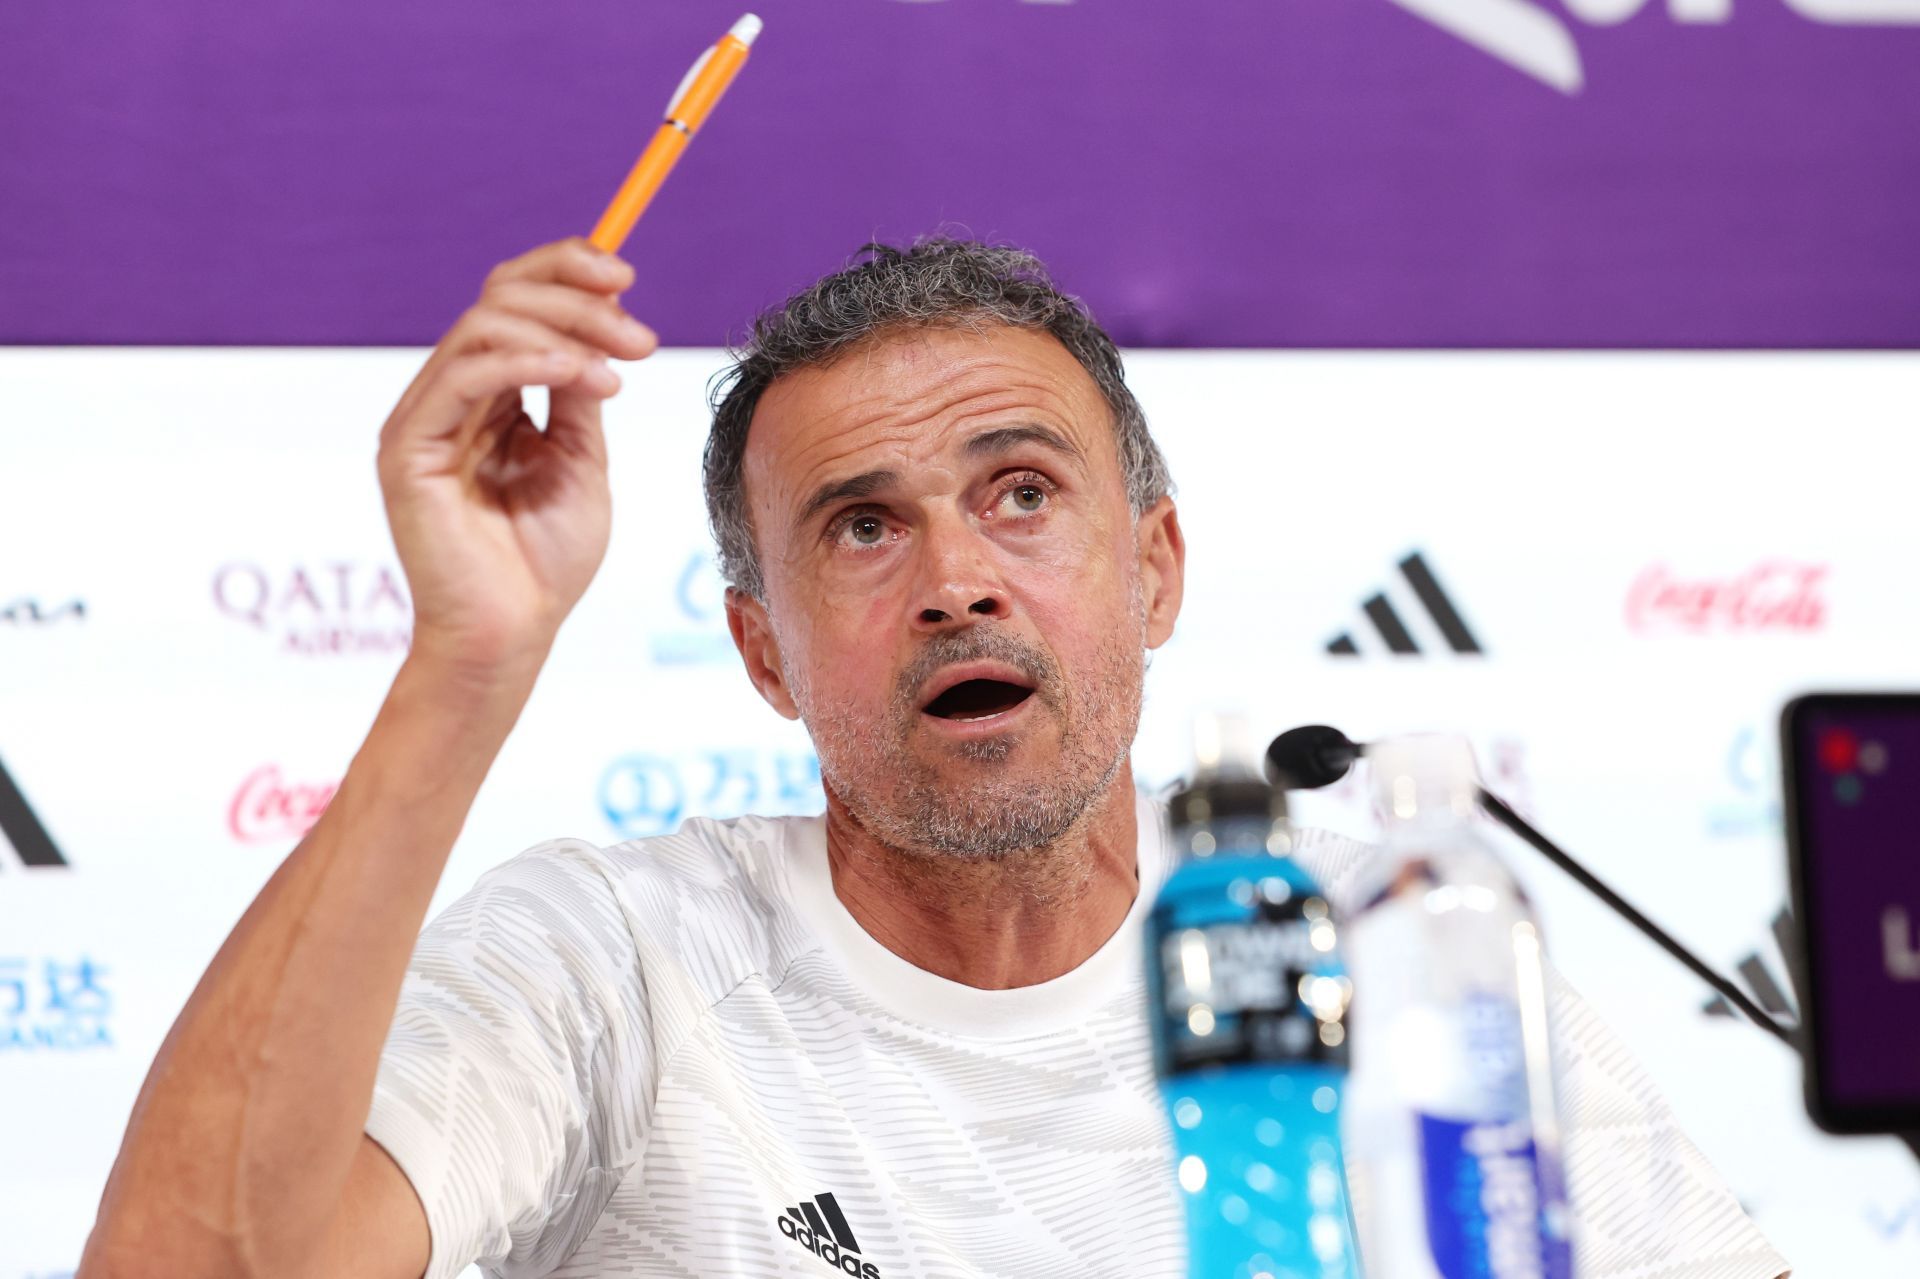 Luis Enrique (in pic) could succeed Potter as the next permanent manager.